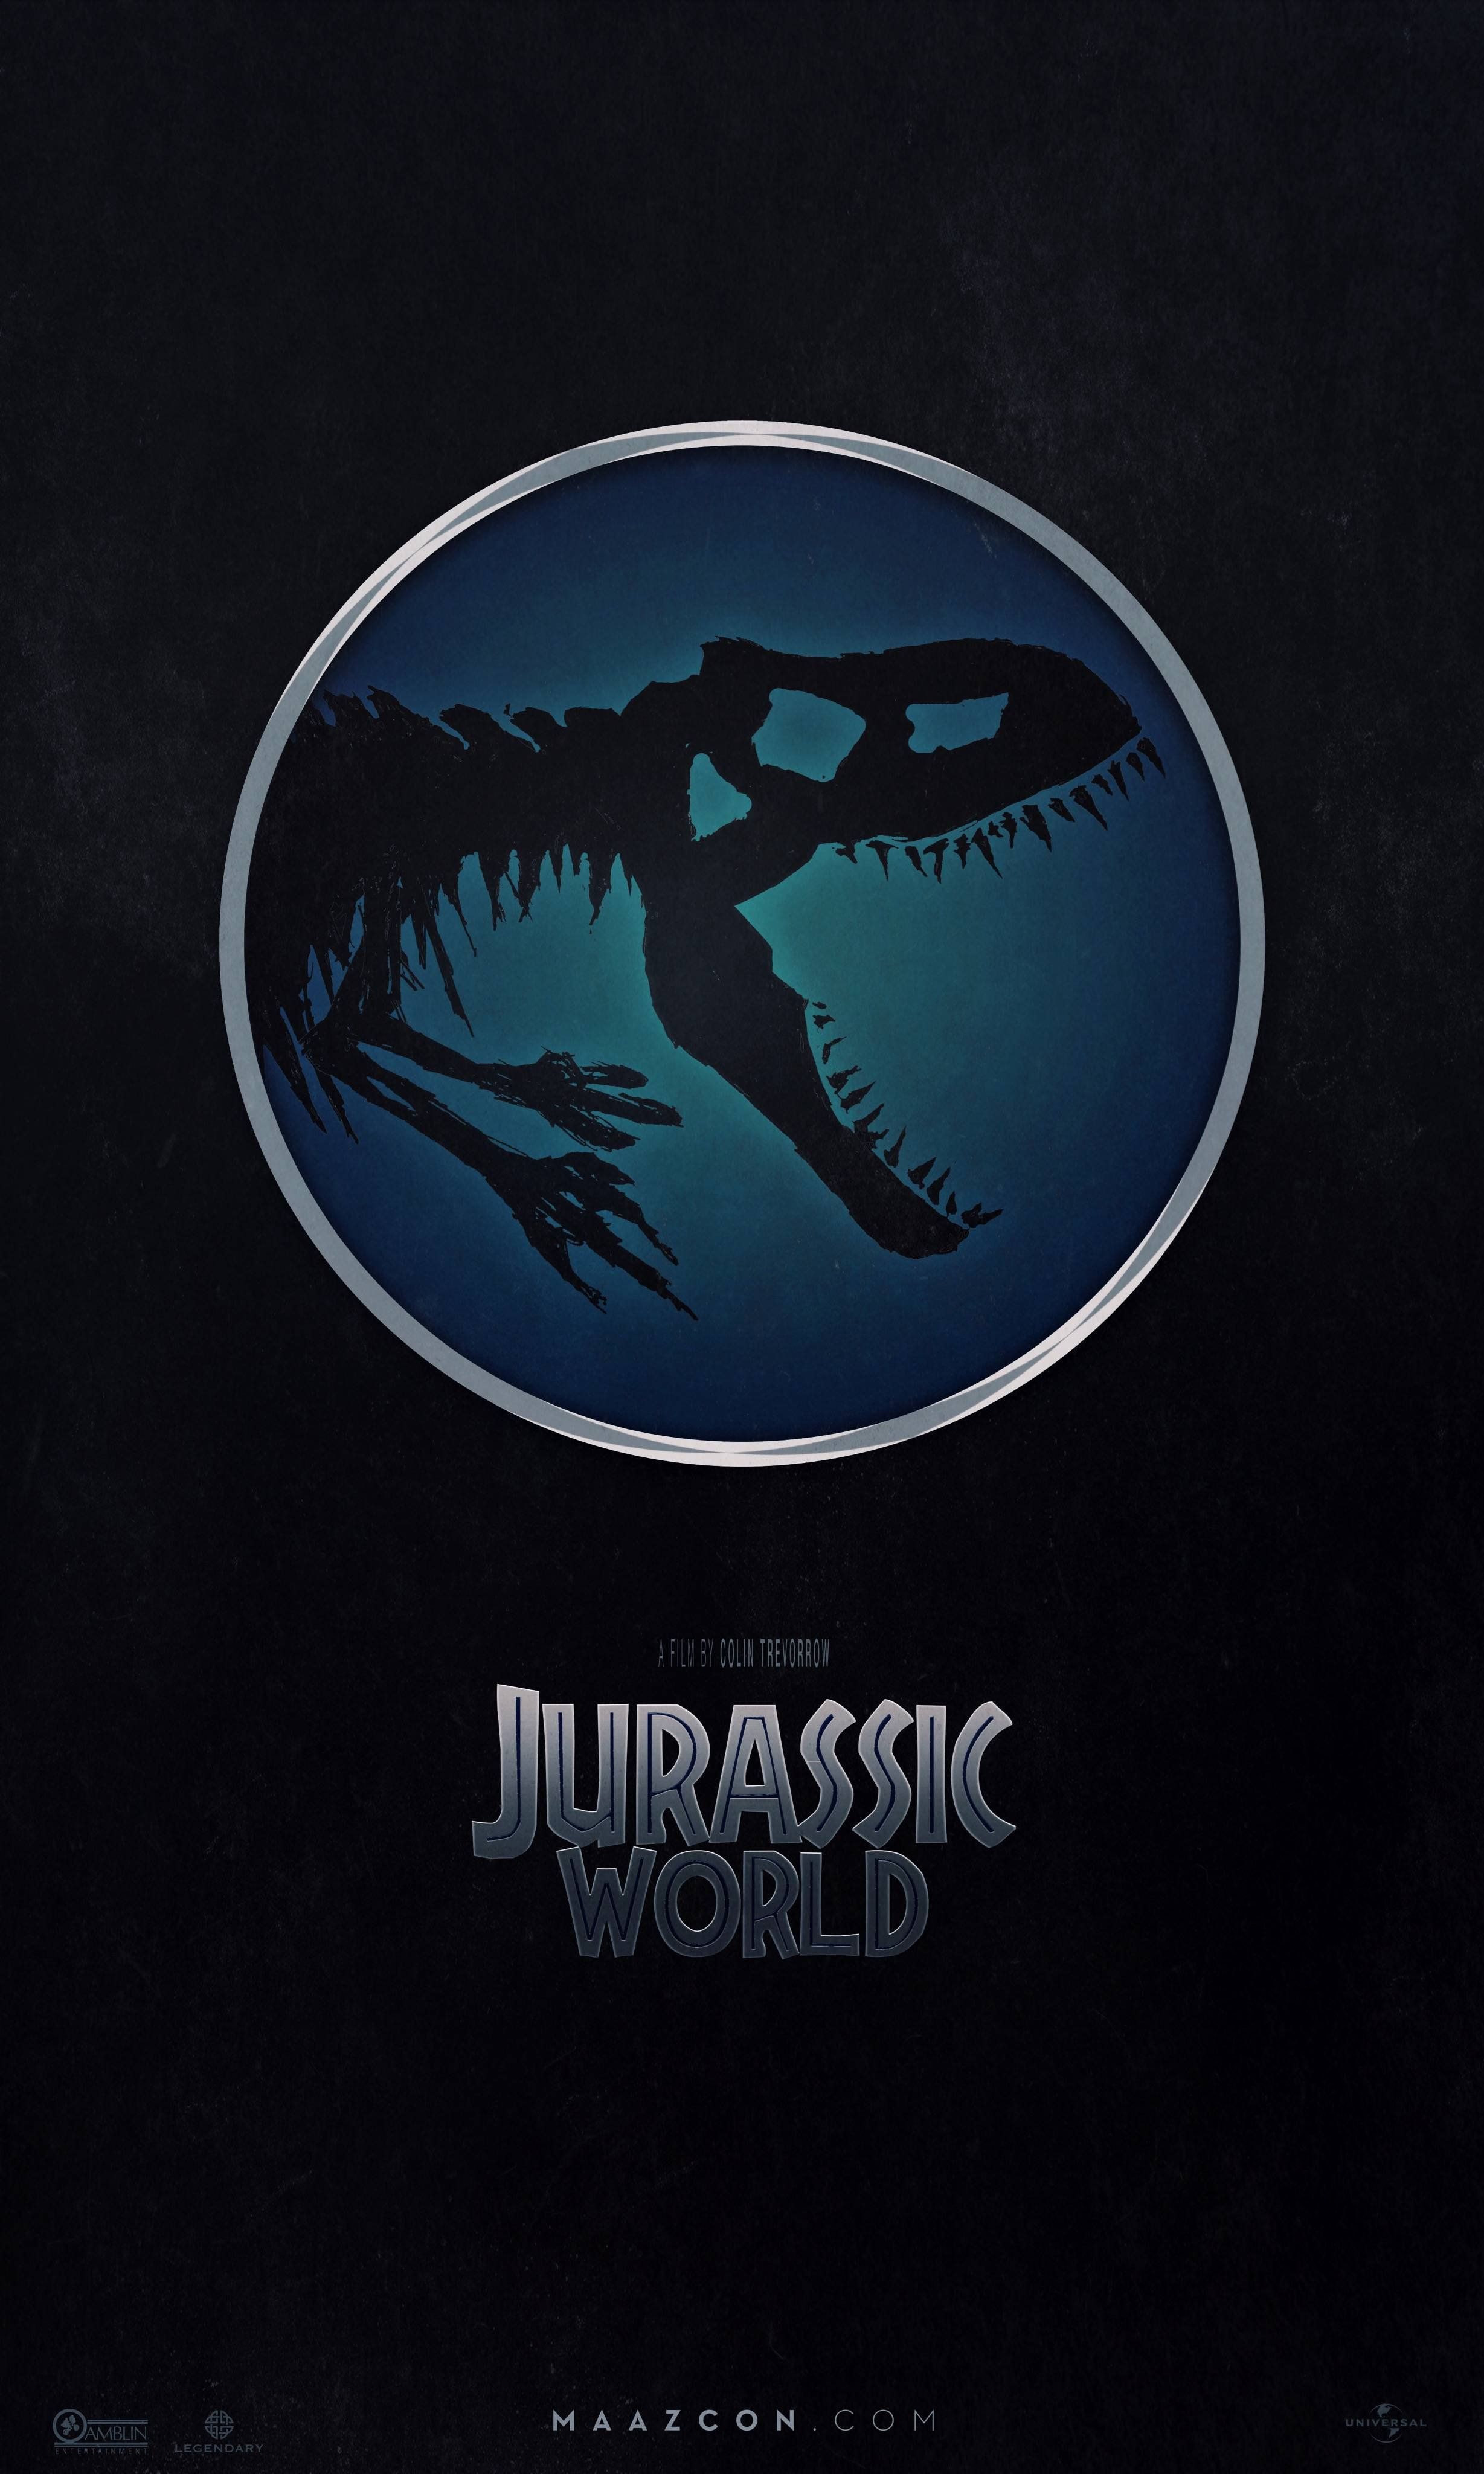 Tried out a logo concept with the Indominus Rex. I used